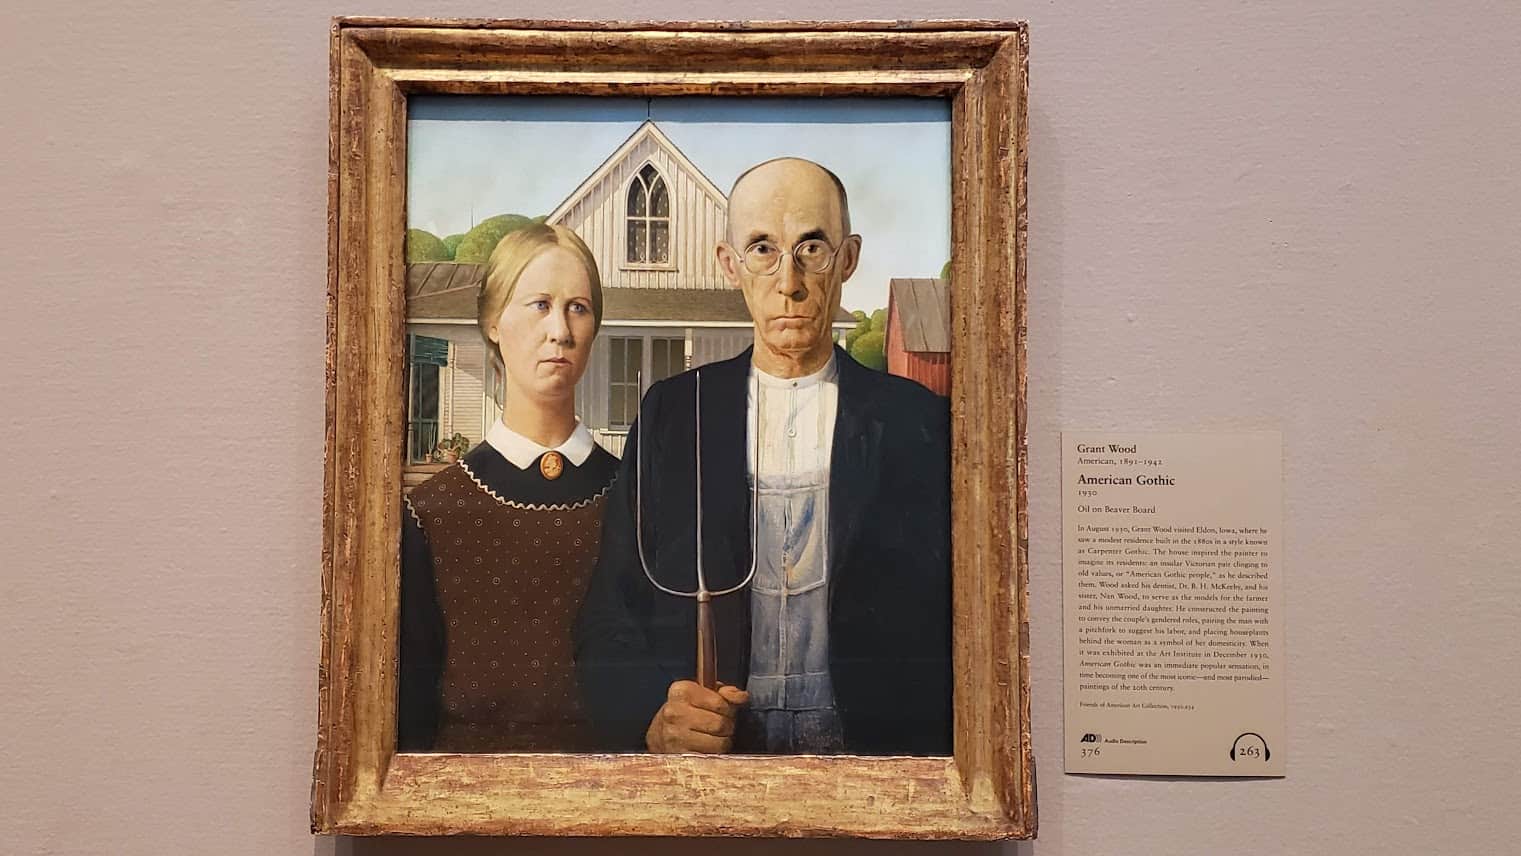 American Gothic at the Art Institute of Chicago.